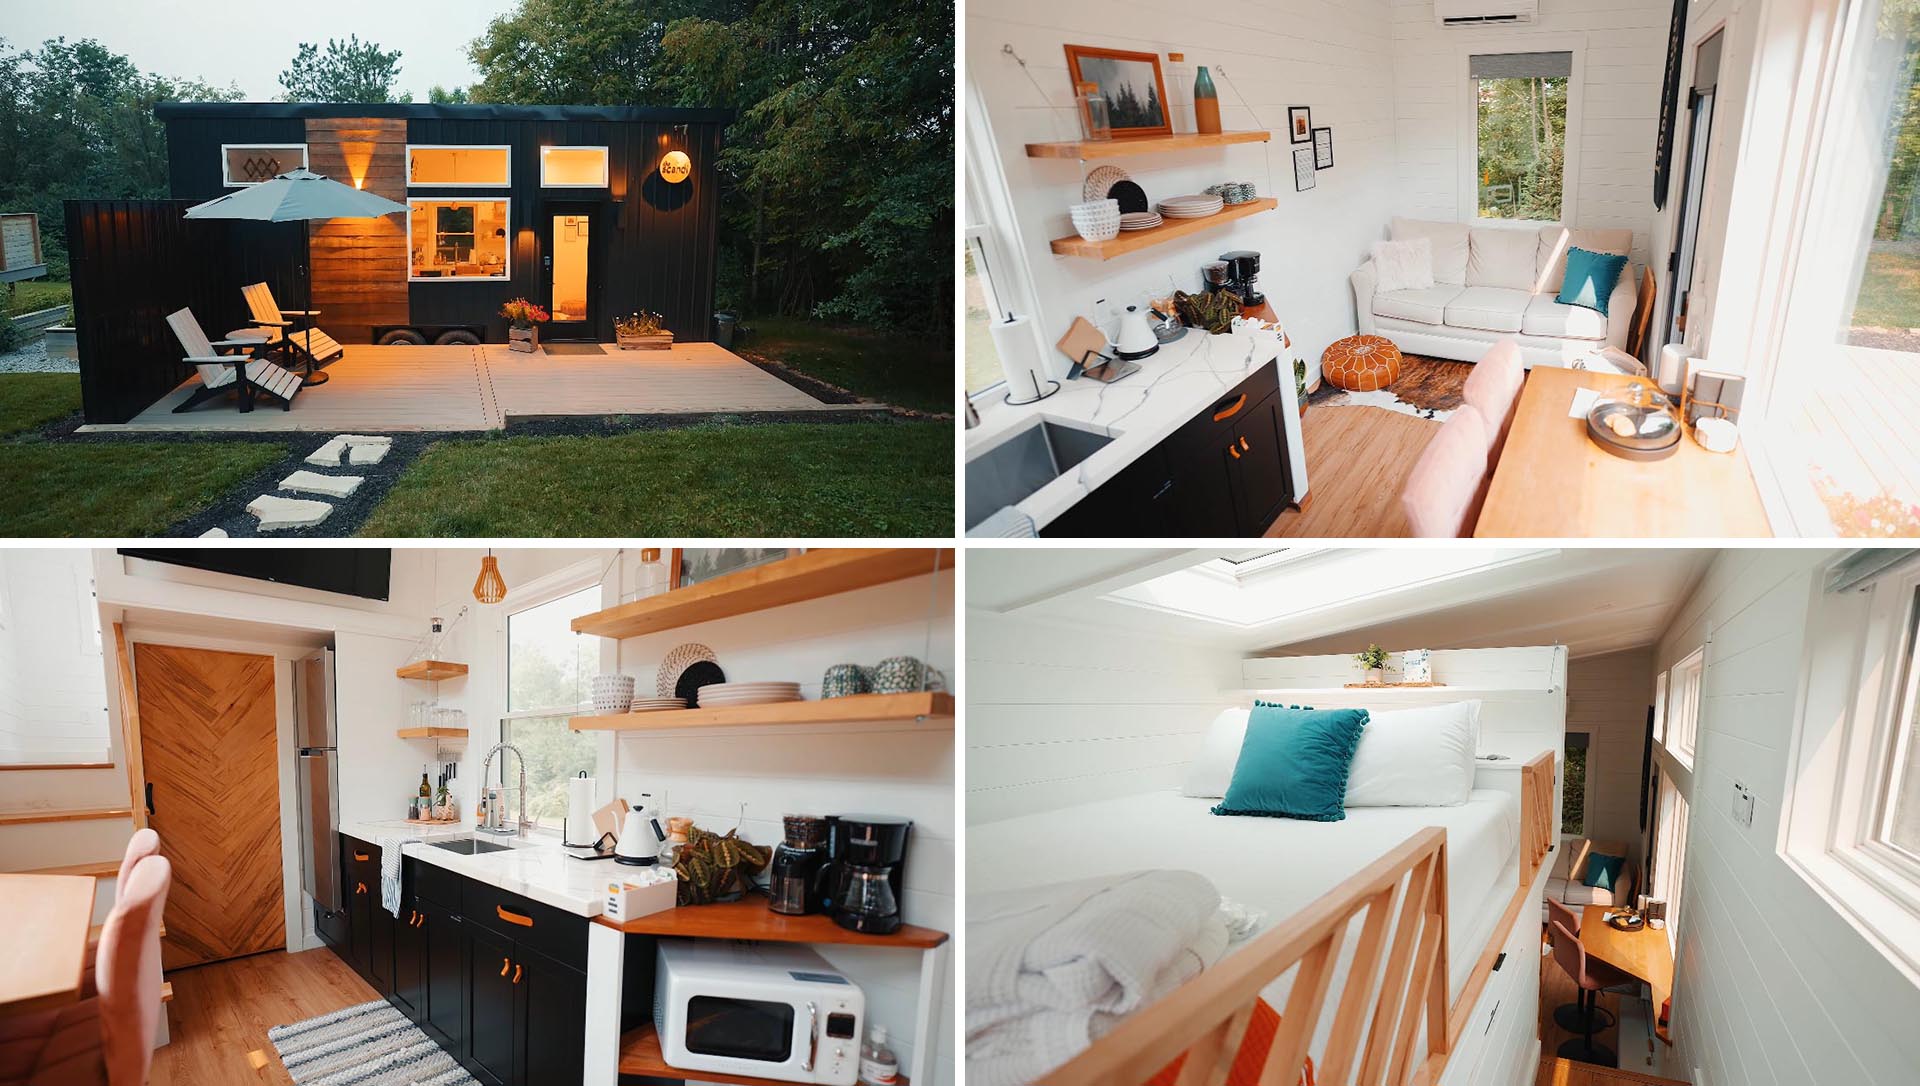 A modern tiny house in Ohio, designed with Nordic/Scandinavian influences throughout.